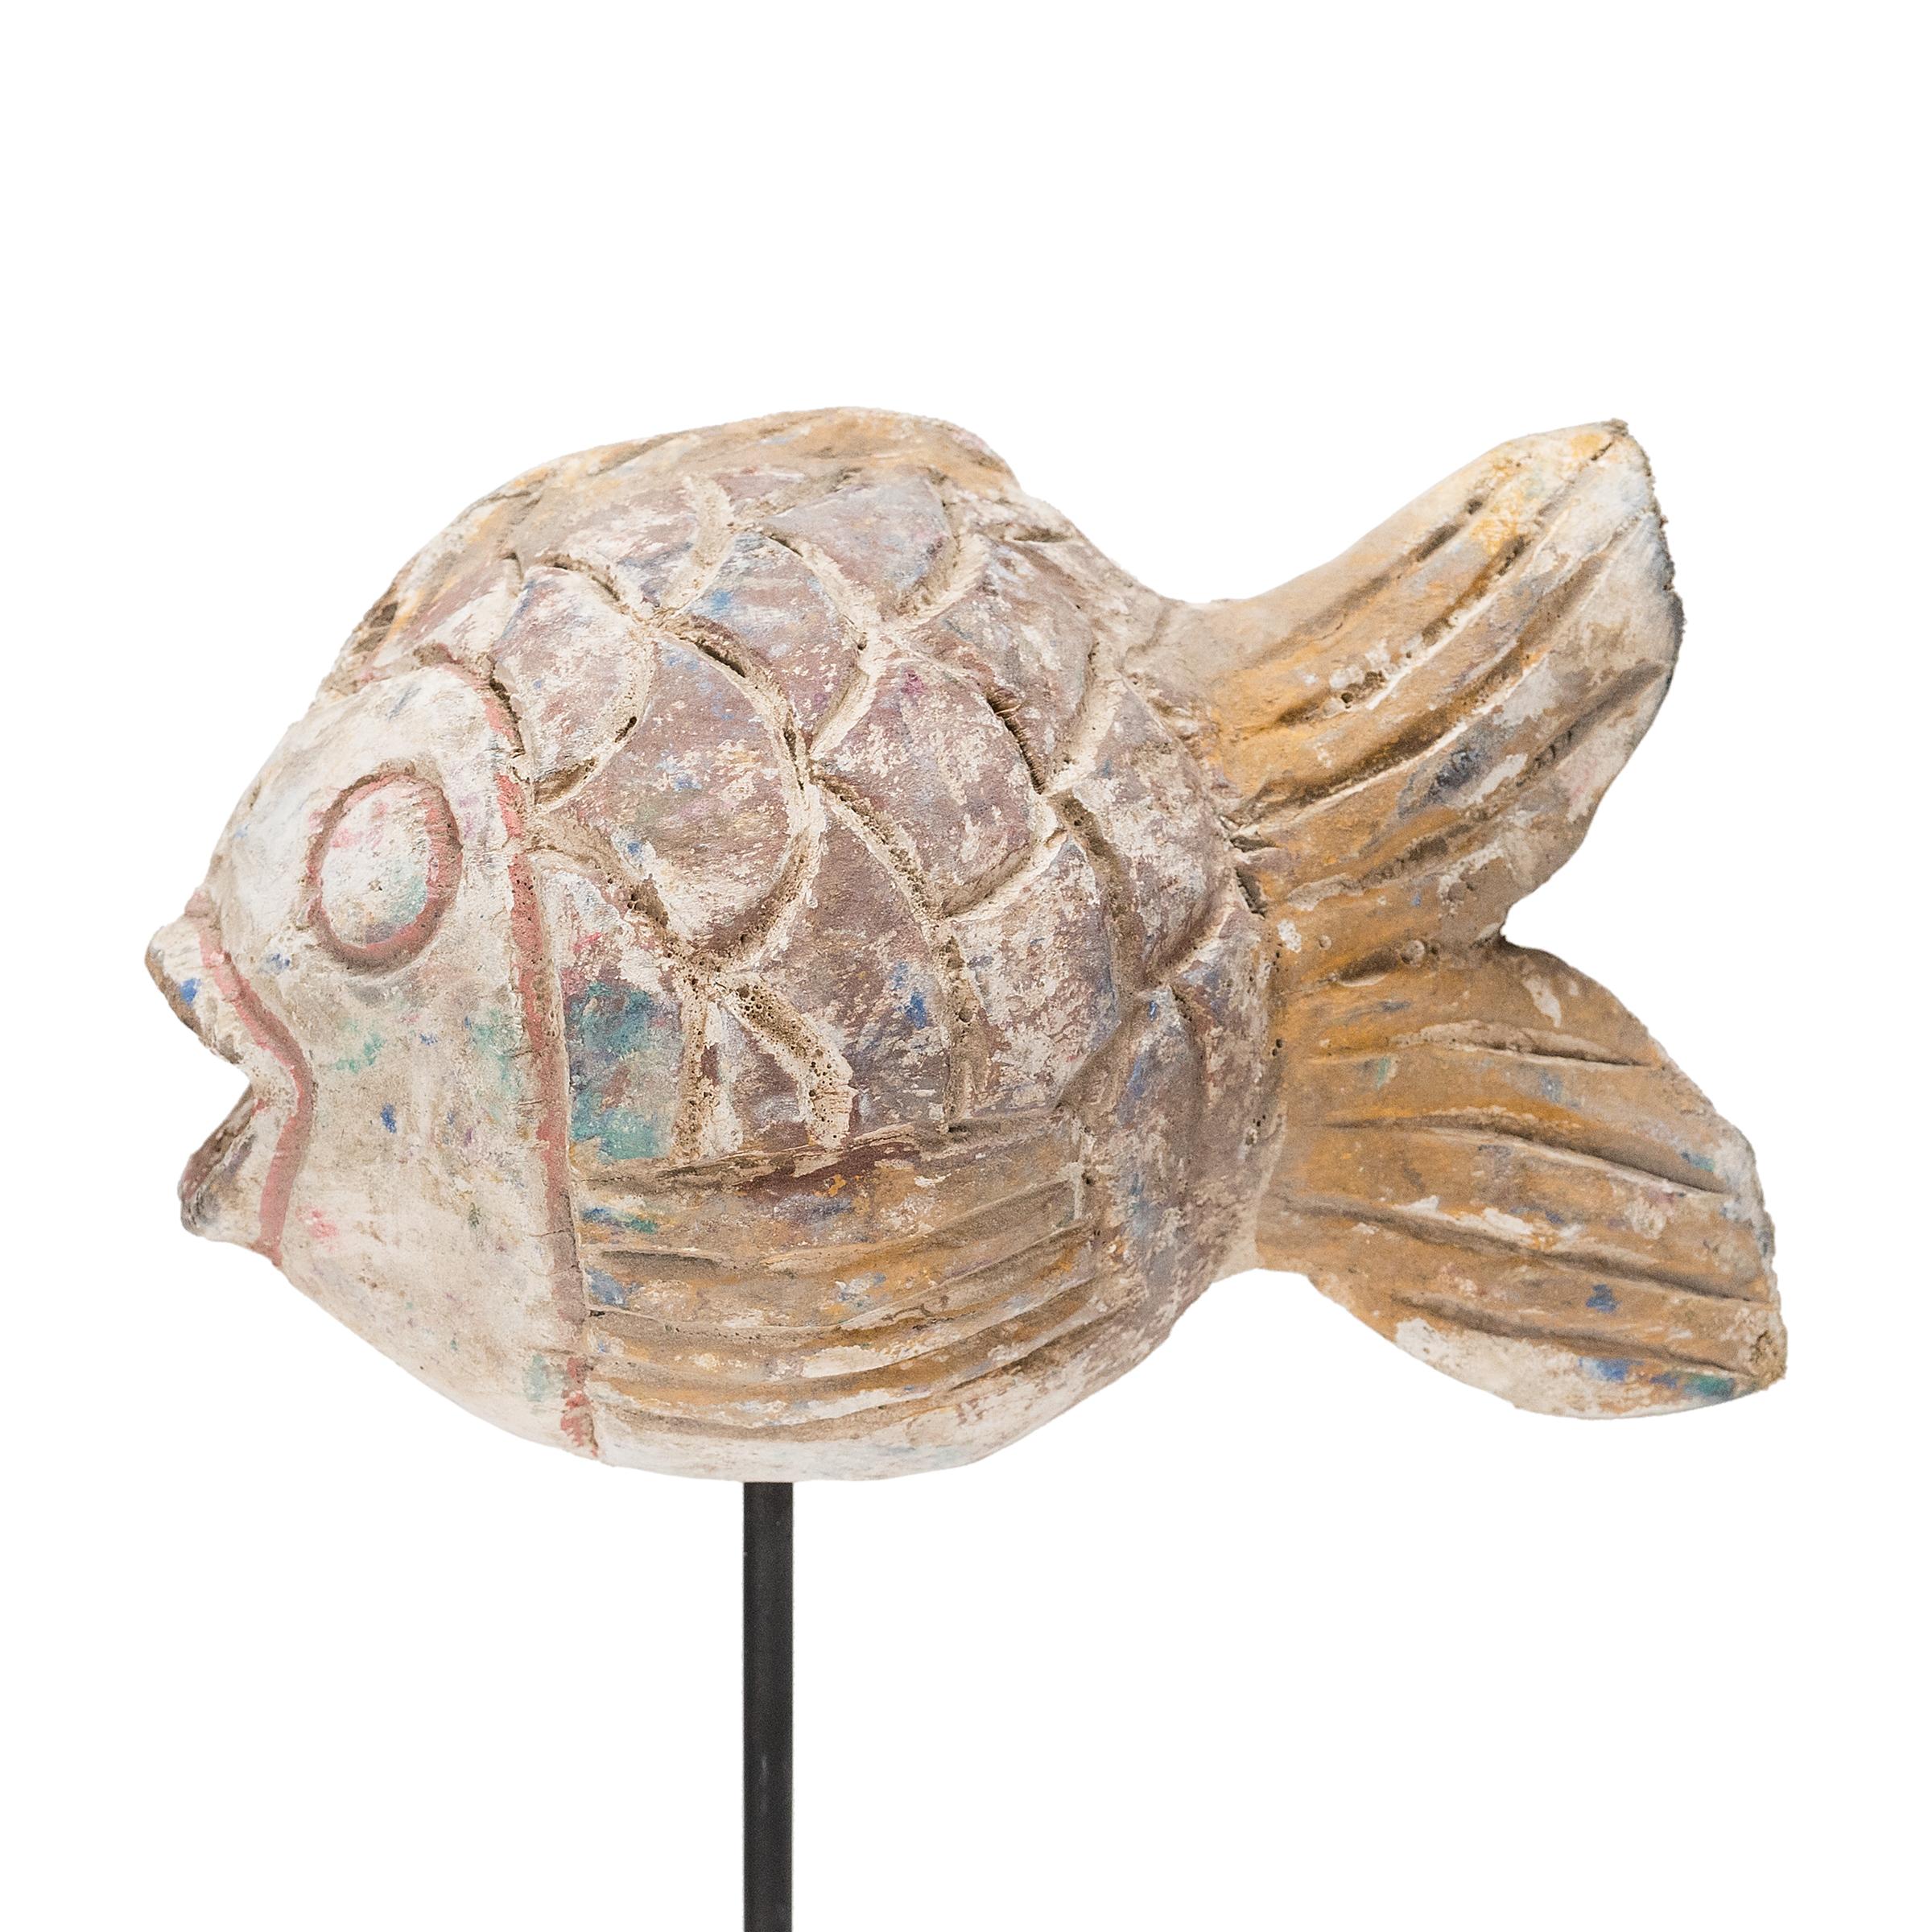 Hand-crafted from reclaimed wood, this artisanal koi sculpture is a traditional symbol of harmony and luck. For Buddhists, such a fish represents a freedom from all restraints. The fish is sculpted with a squat, rounded body and decorated with